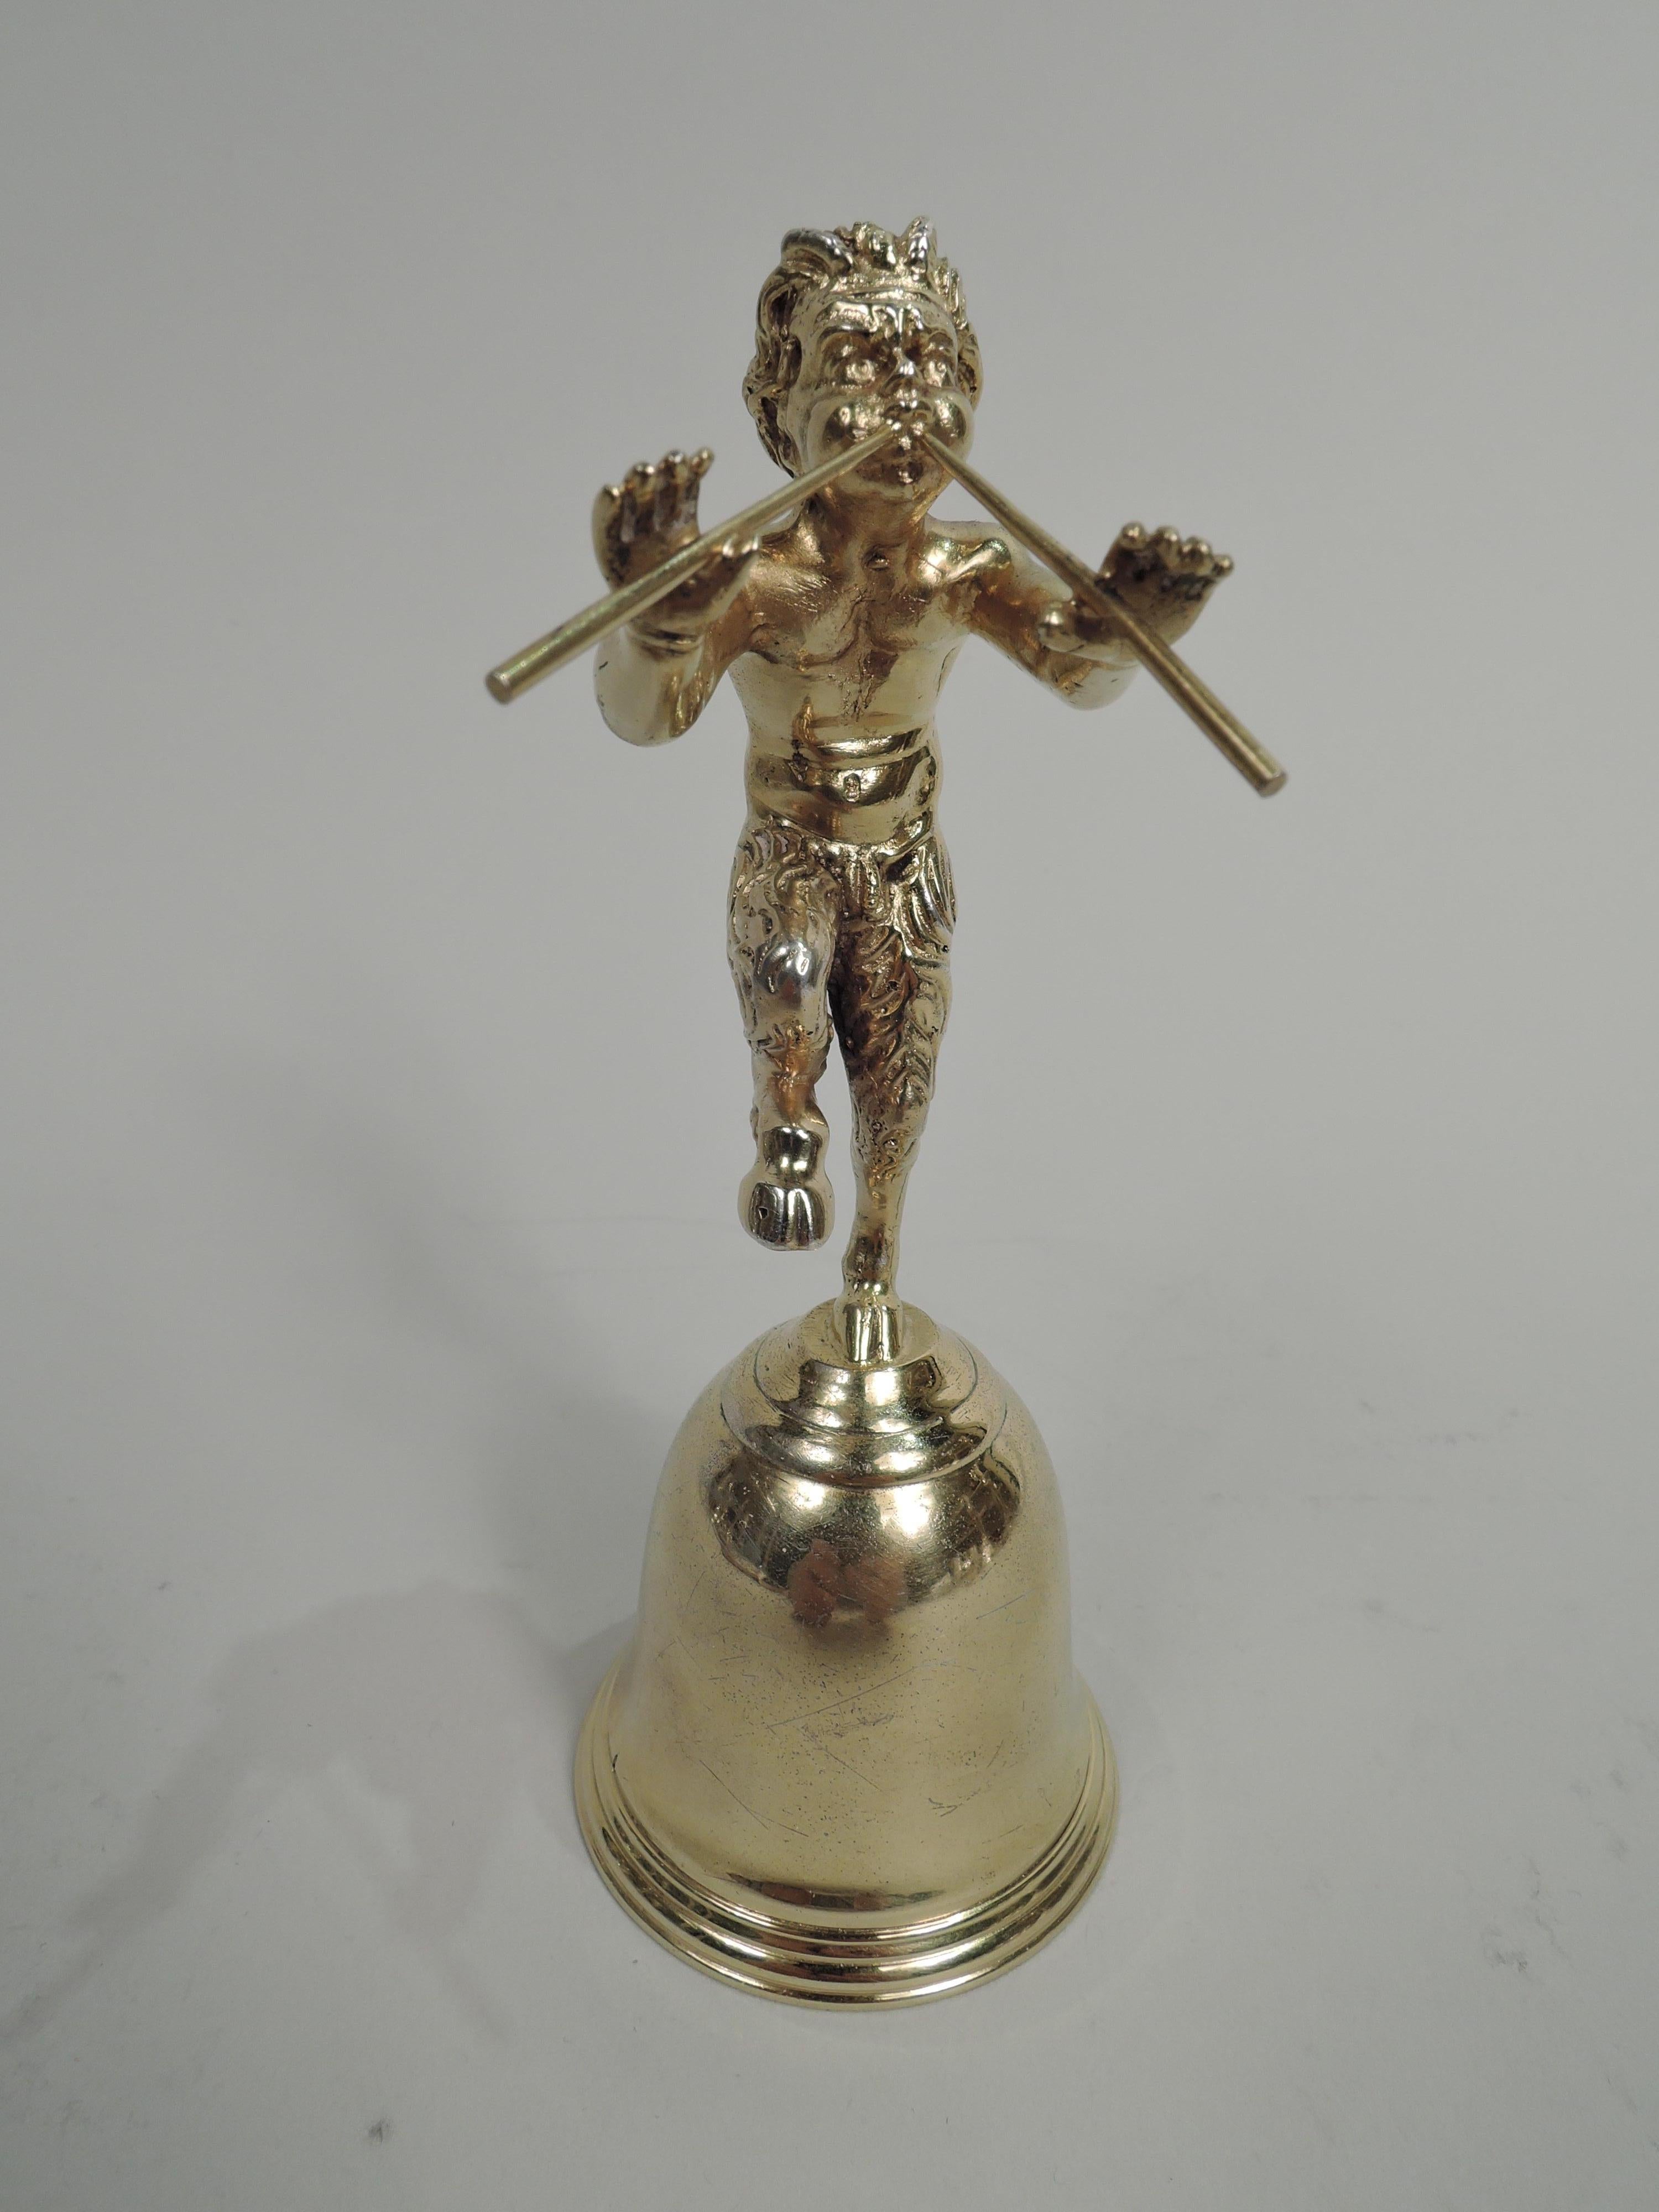 Italian silver gilt grand-tour bell, ca 1920. Figural handle in form of piping faun with puffed out cheeks and hoofed and hirsute hindquarters. Based on Greek statuette excavated in Pompeii and today in the National Archaeological Museum in Naples.